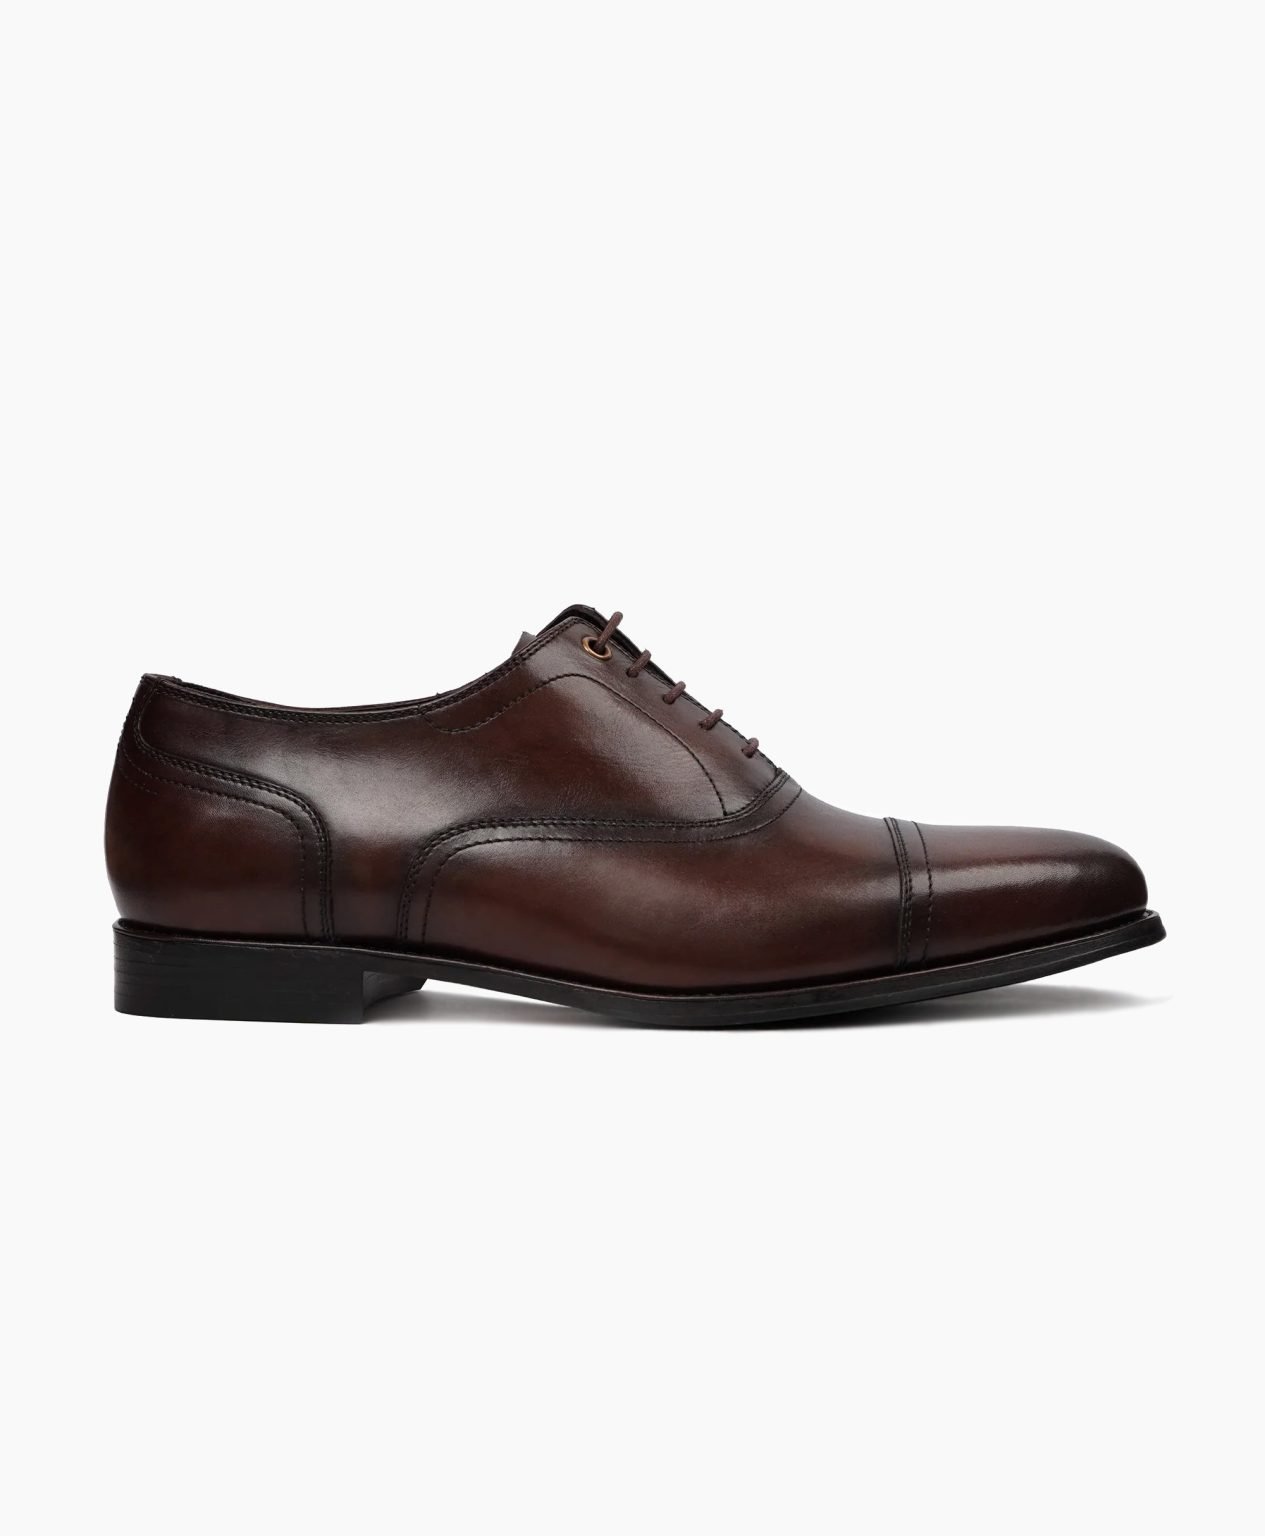 truro-oxford-dark-brown-leather-shoes-image201